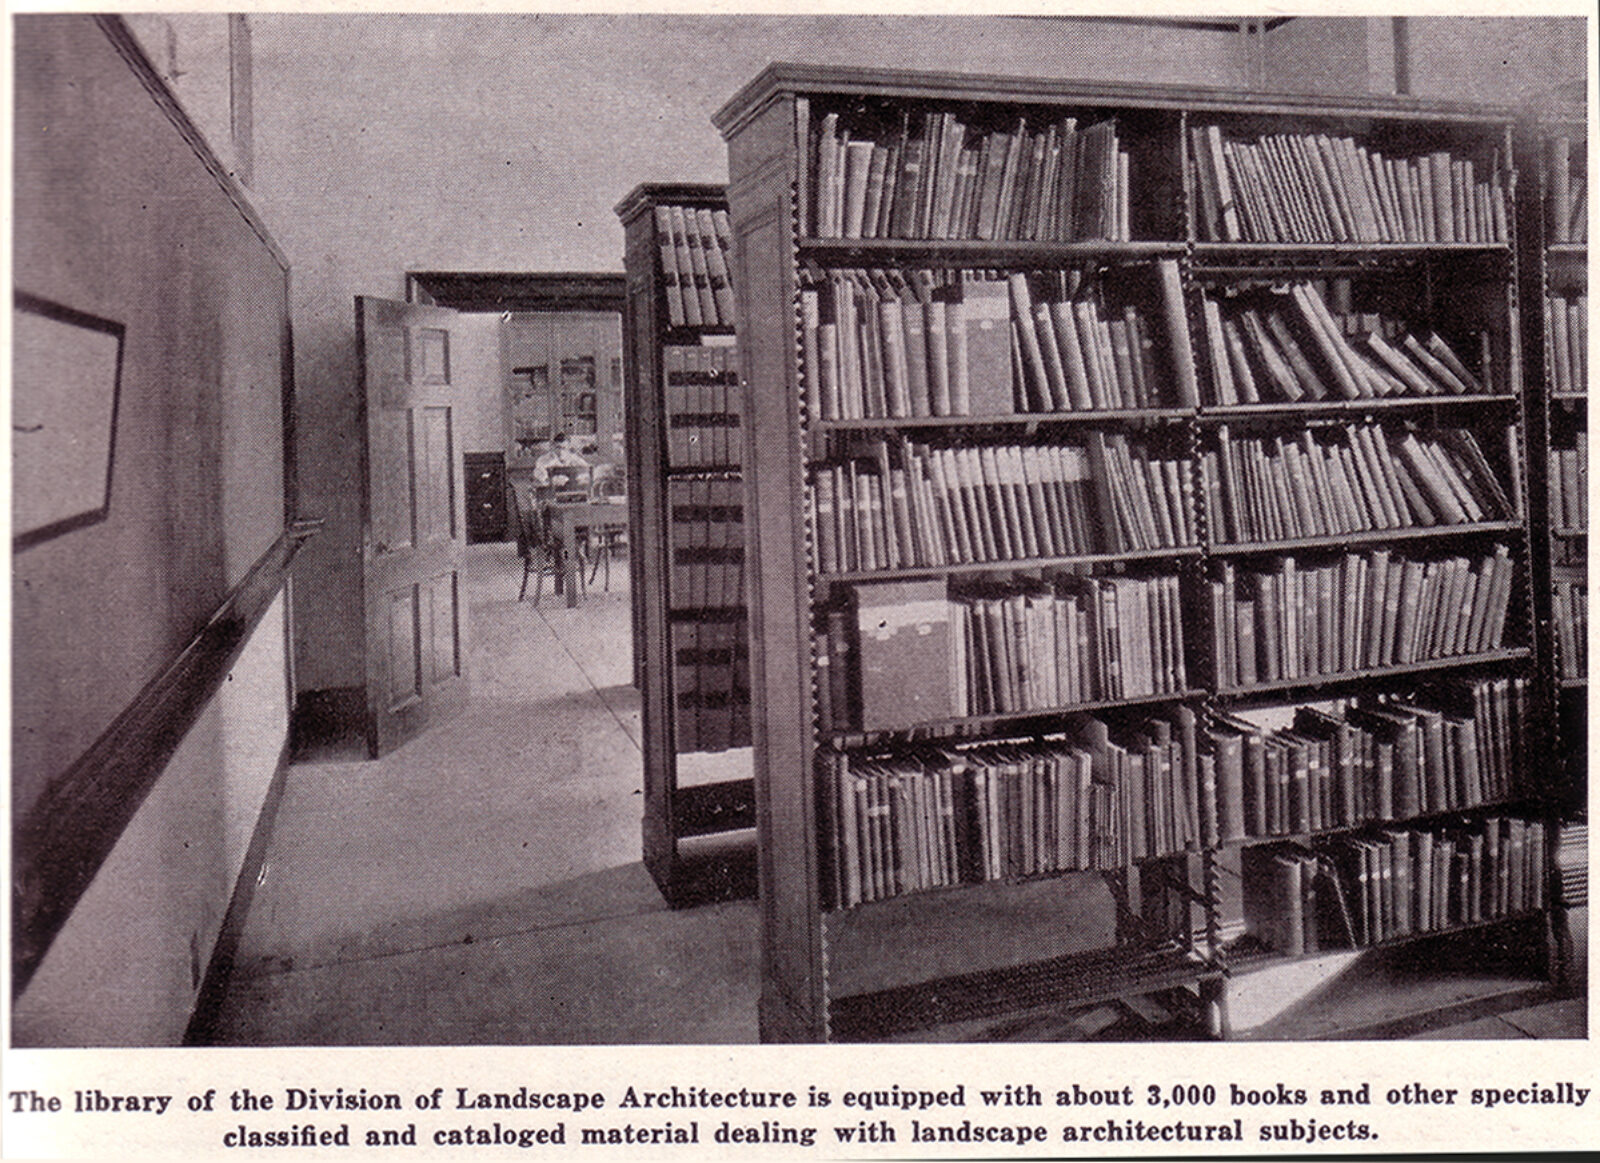 View of stacks in City Planning & Landscape Architecture (CPLA) Library at 203 Mumford Hall